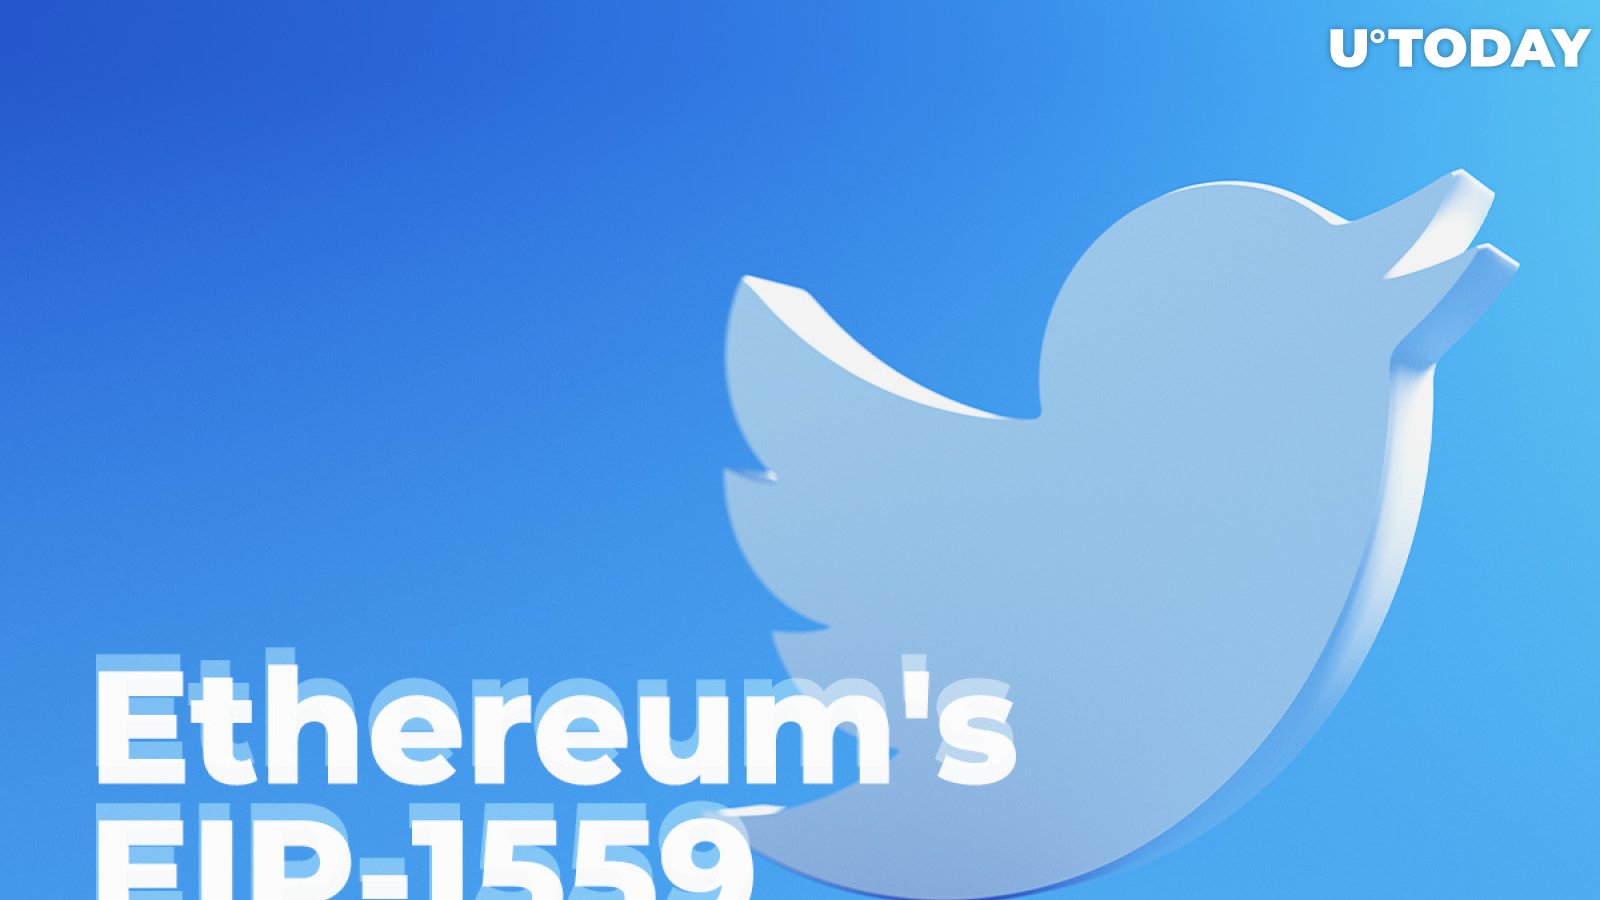 Ethereum's EIP 1559 as Seen by Crypto Twitter